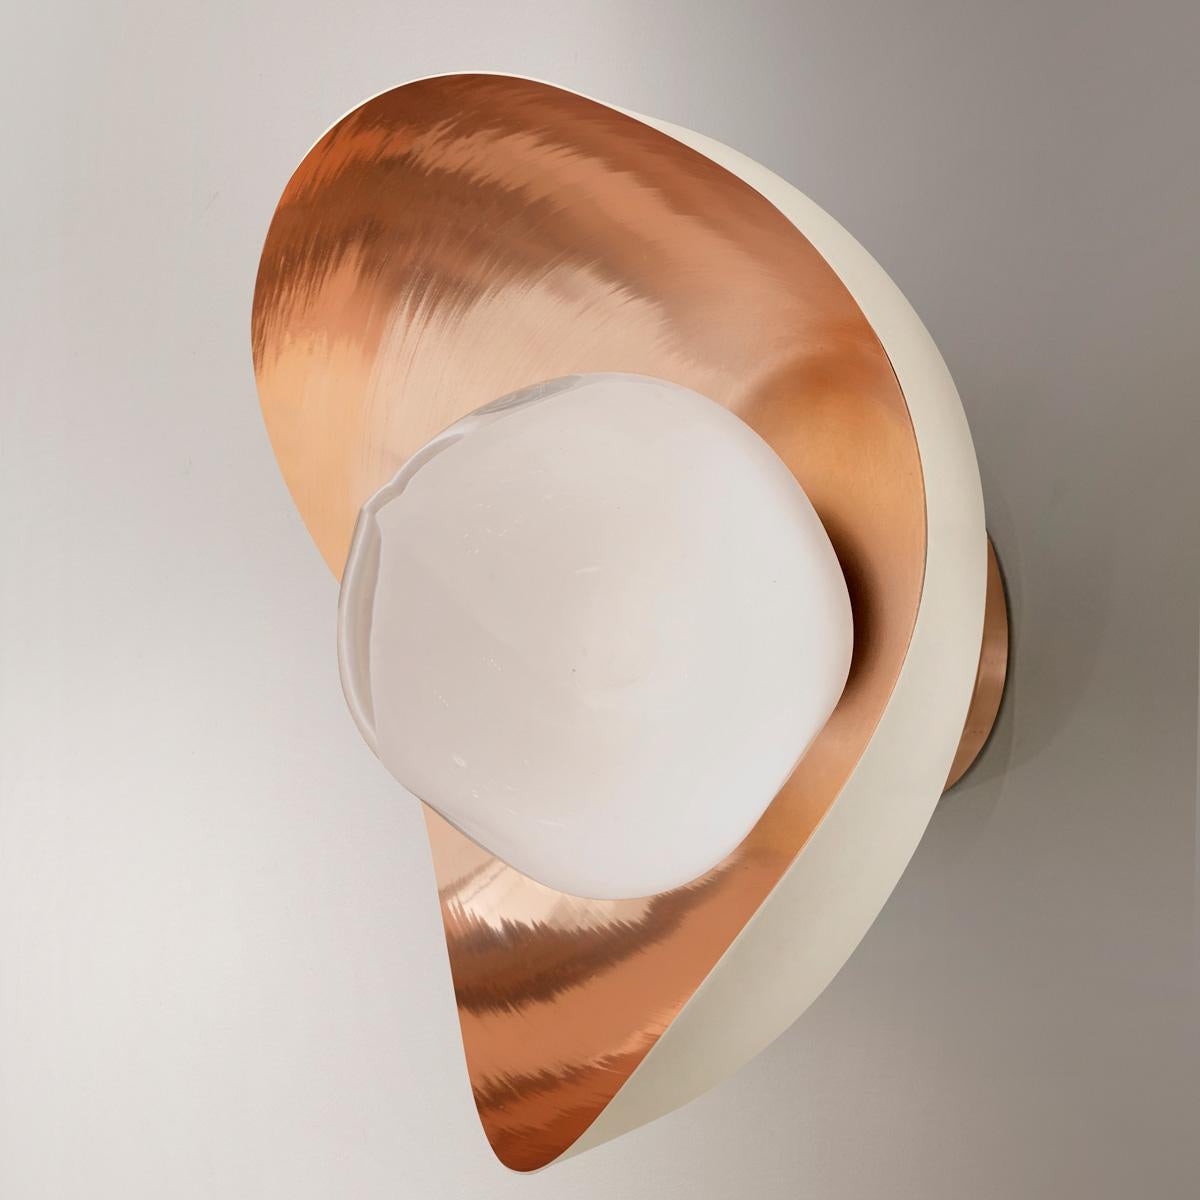 The Perla wall light features an organic brass shell nestling our Sfera glass handblown in Tuscany. The first images show the fixture with a polished copper interior and sand white exterior finish-subsequent pictures show it in a selection of